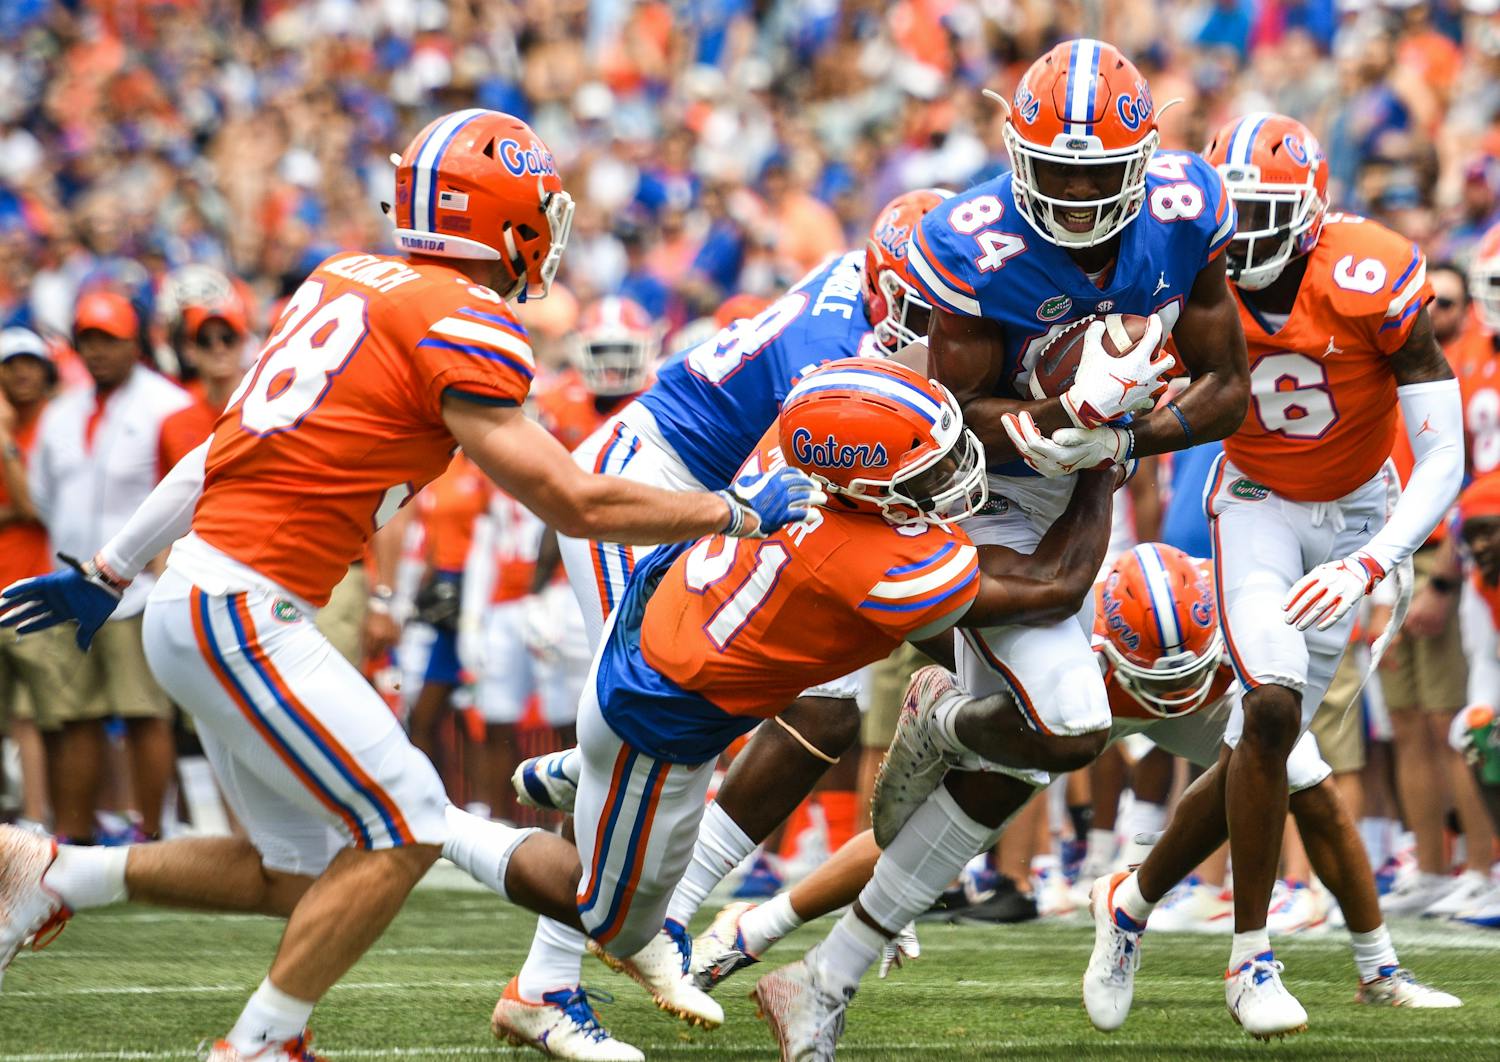 Tight end Kyle Pitts recorded four catches for 56 yards for the Blue team in UF's Orange and Blue game. Blue was defeated by Orange 60-35 in the highest-scoring spring game of all time. 